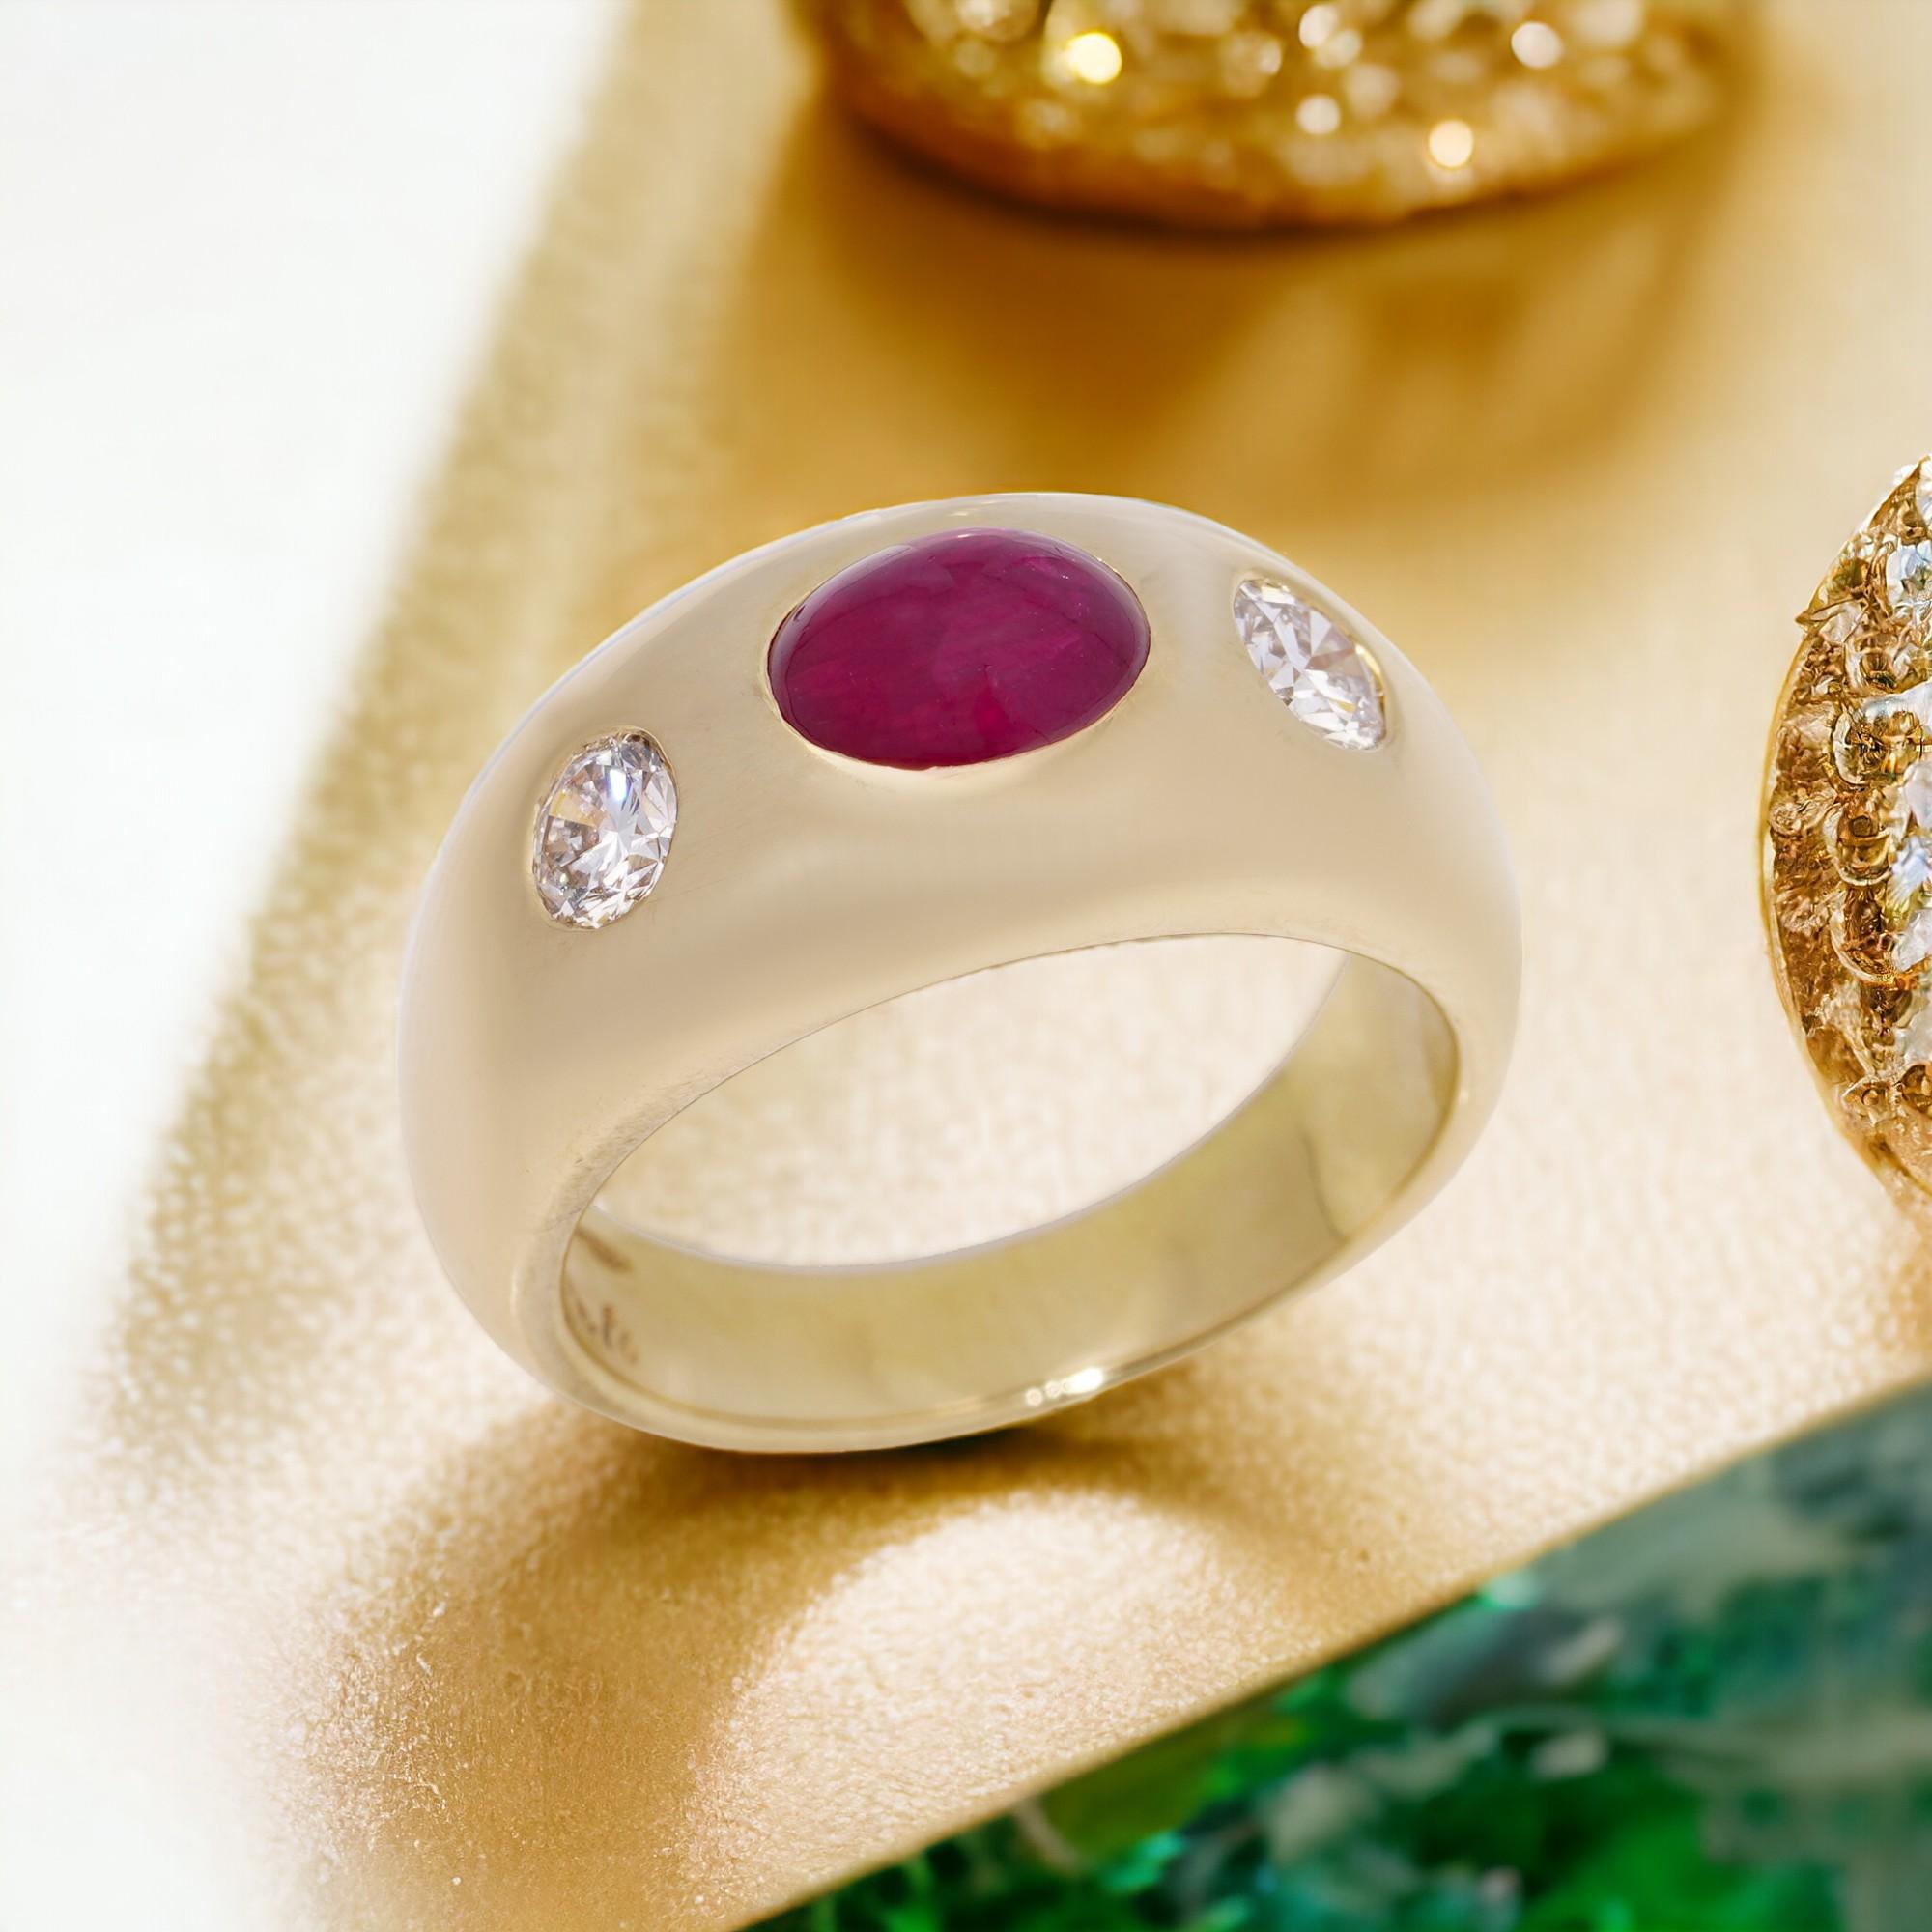 Bvlgari 18kt. yellow gold three stone ring, set with oval 1.29 cts. of Natural Burma cabochon ruby and 0.40 cts. of round Old-European cut diamonds. 
Made in Italy, Circa 1940 - 1950's  
Fully hallmarked. 

Dimensions -
Finger Size : (UK) = K (US) =